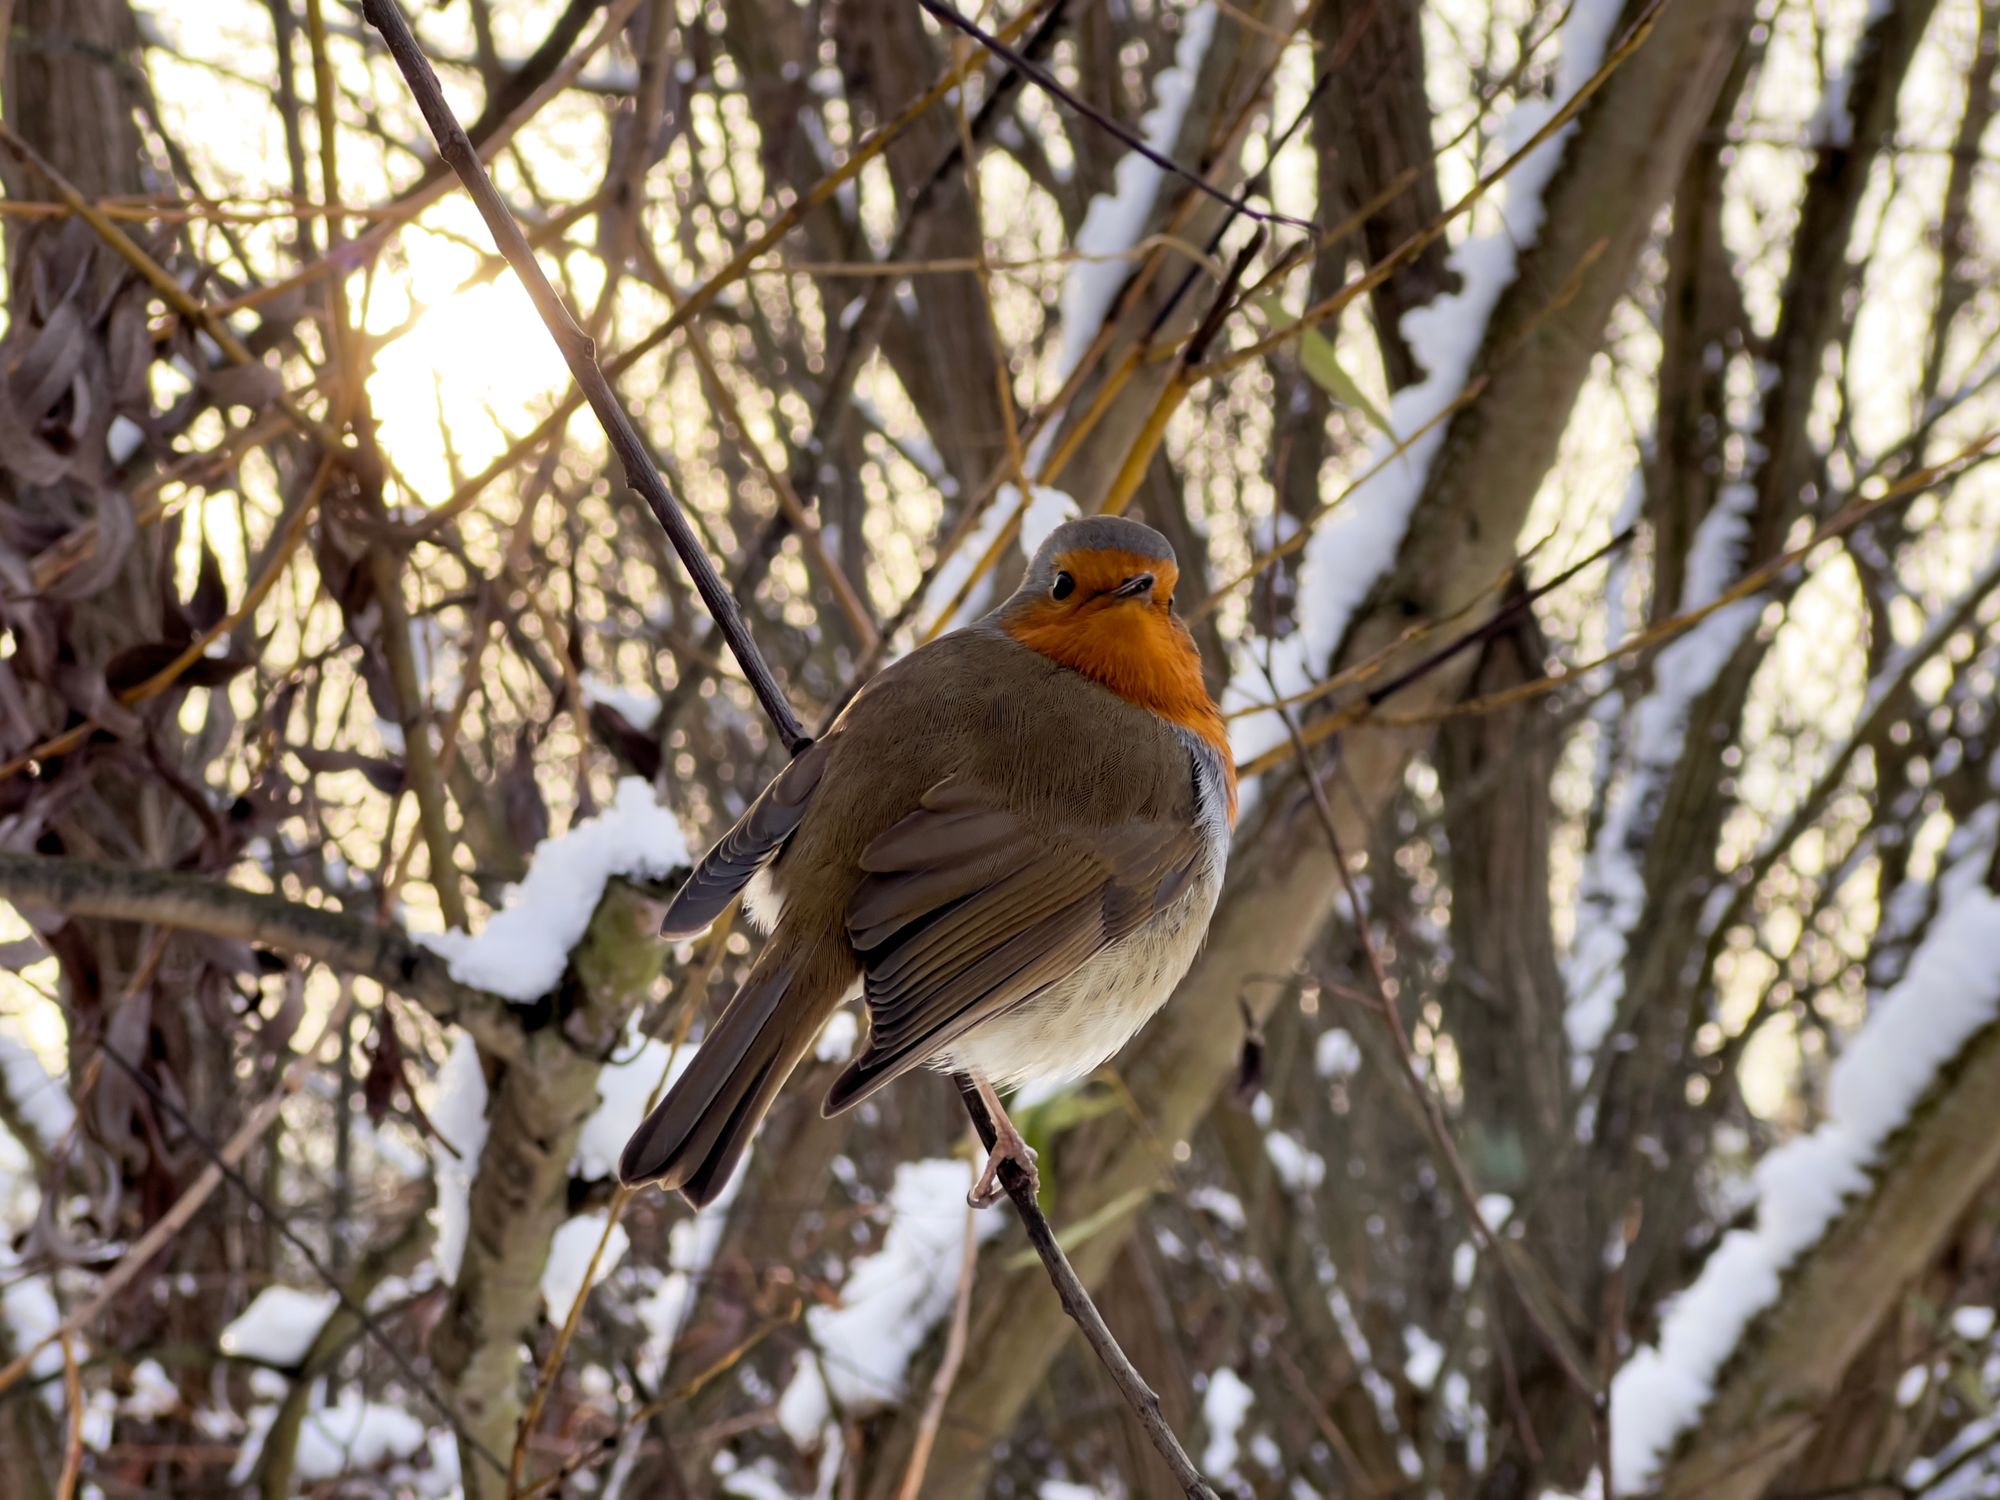 A robin sits on a bare, thin tree branch looking slightly off to camera. Behind is a network of thin and thick tree branches, capped in snow, with the sun behind it casting the sky in a pleasant yellow colour with tiny bokeh balls like gems on the edges.